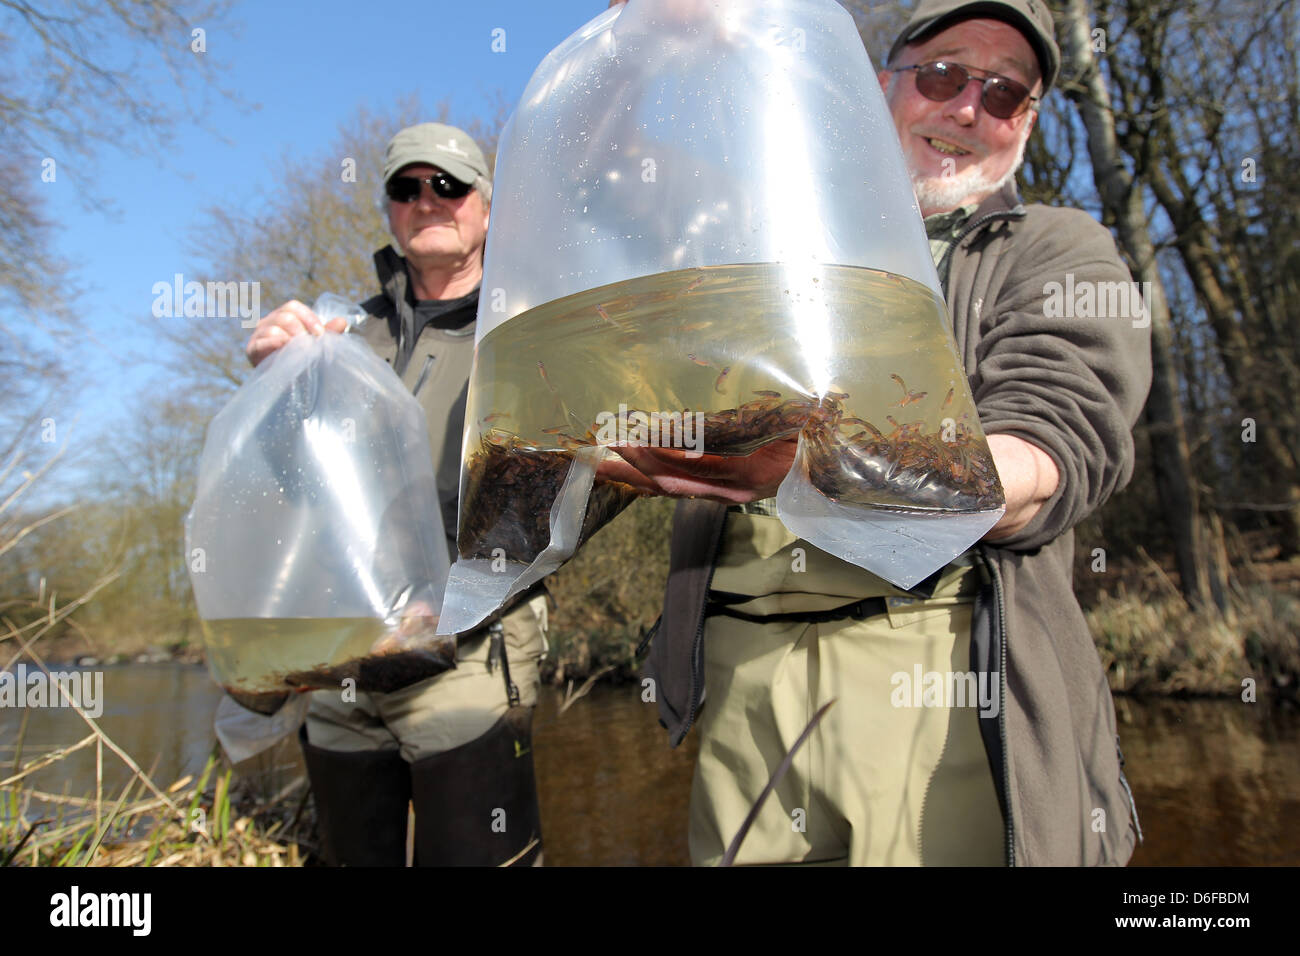 Gross Vollstedt, Germany, Joerg buses and Erwin Greim from fly fishing club Stock Photo